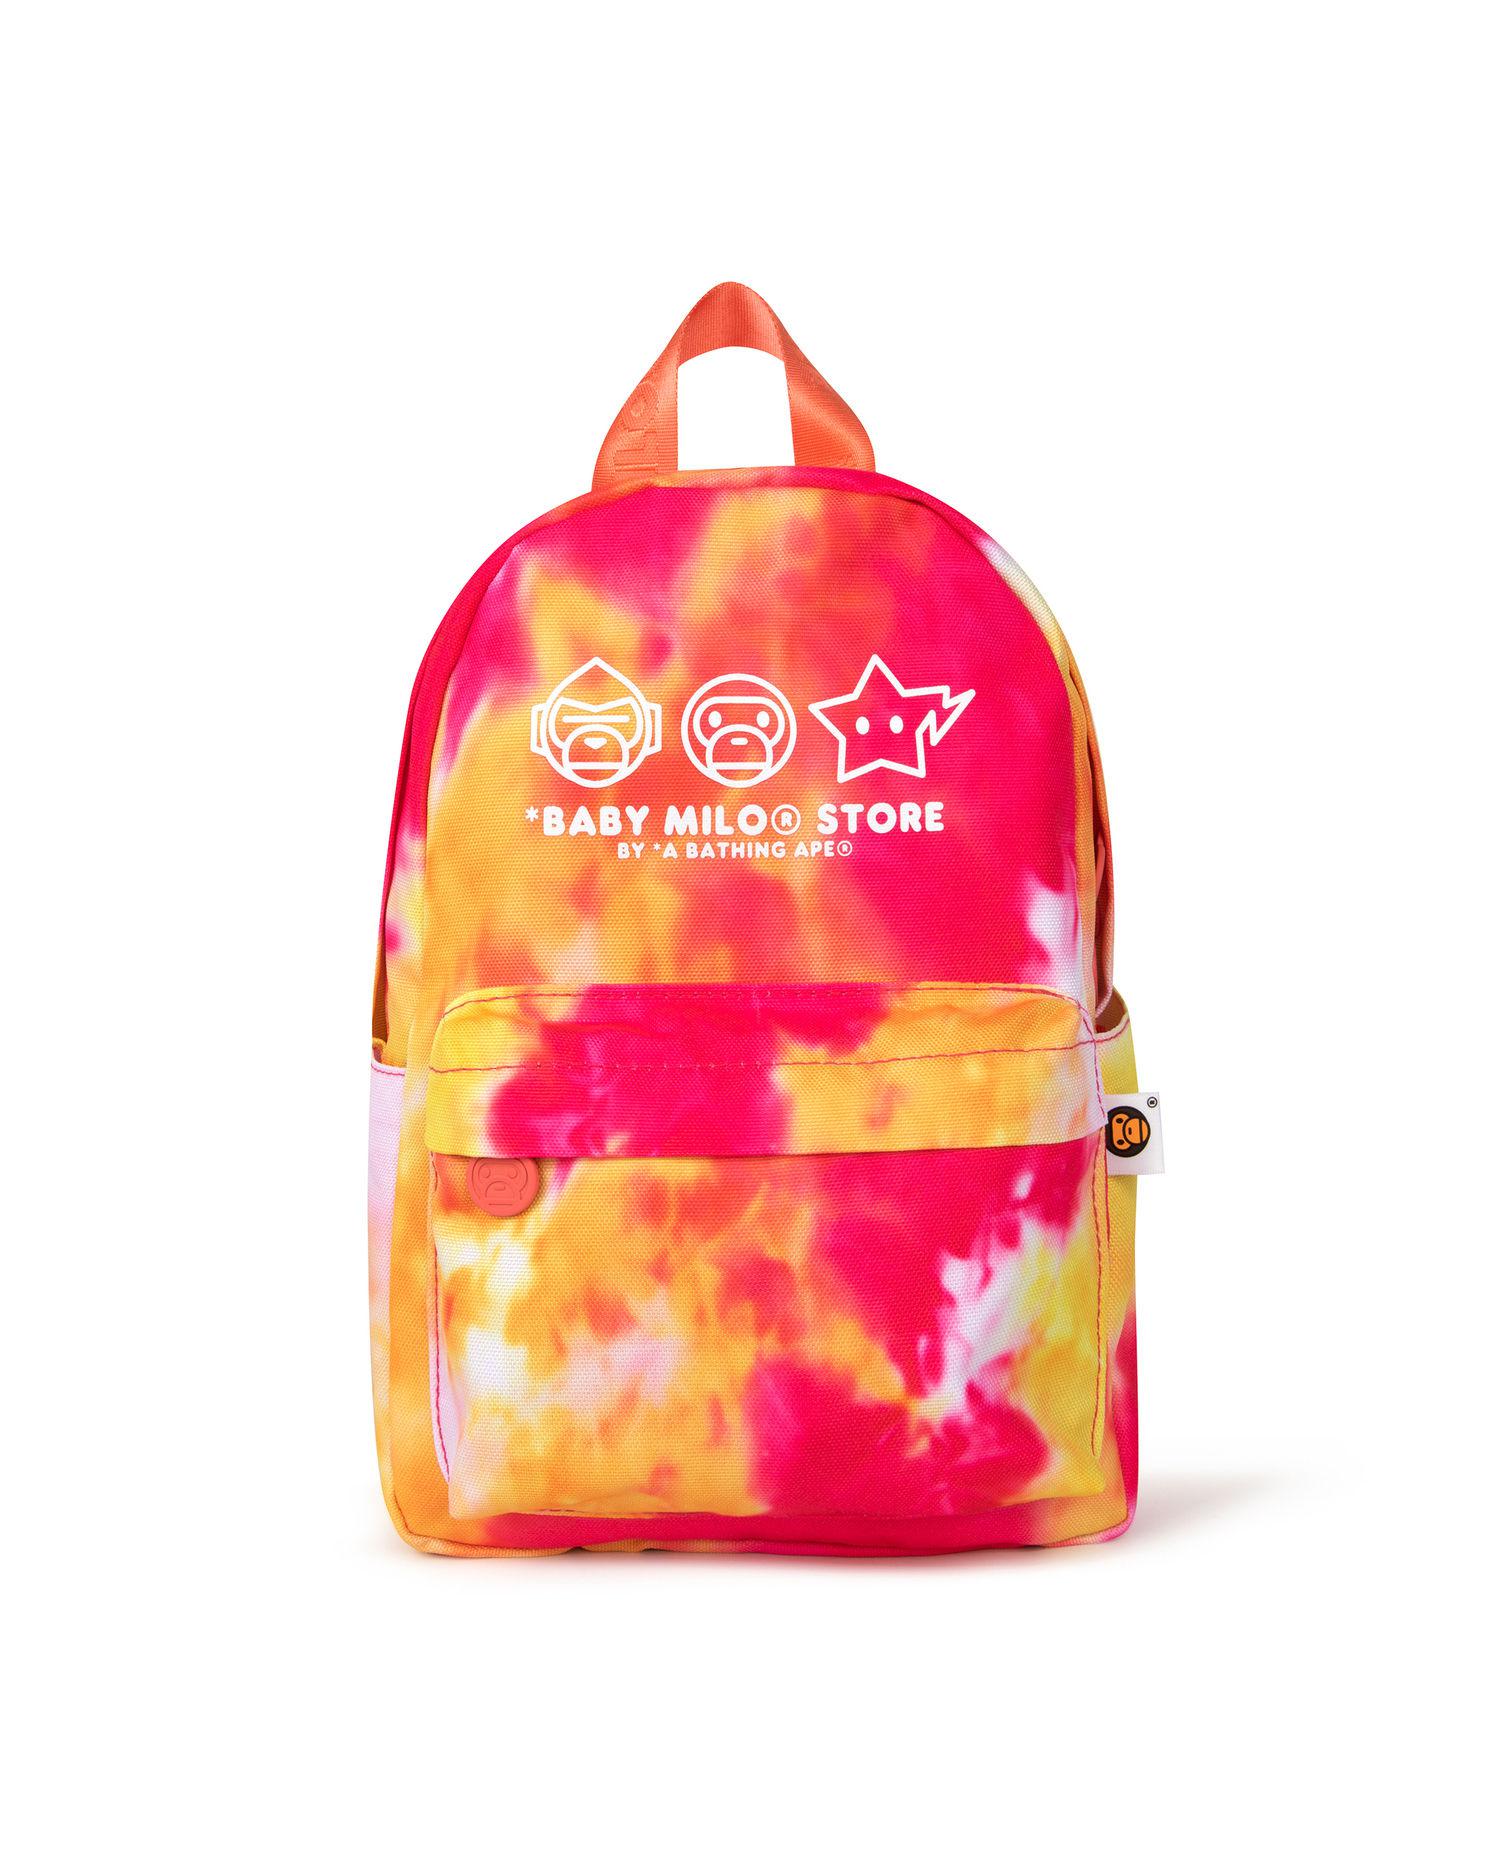 Tie-dye backpack by *BABY MILO(R) STORE